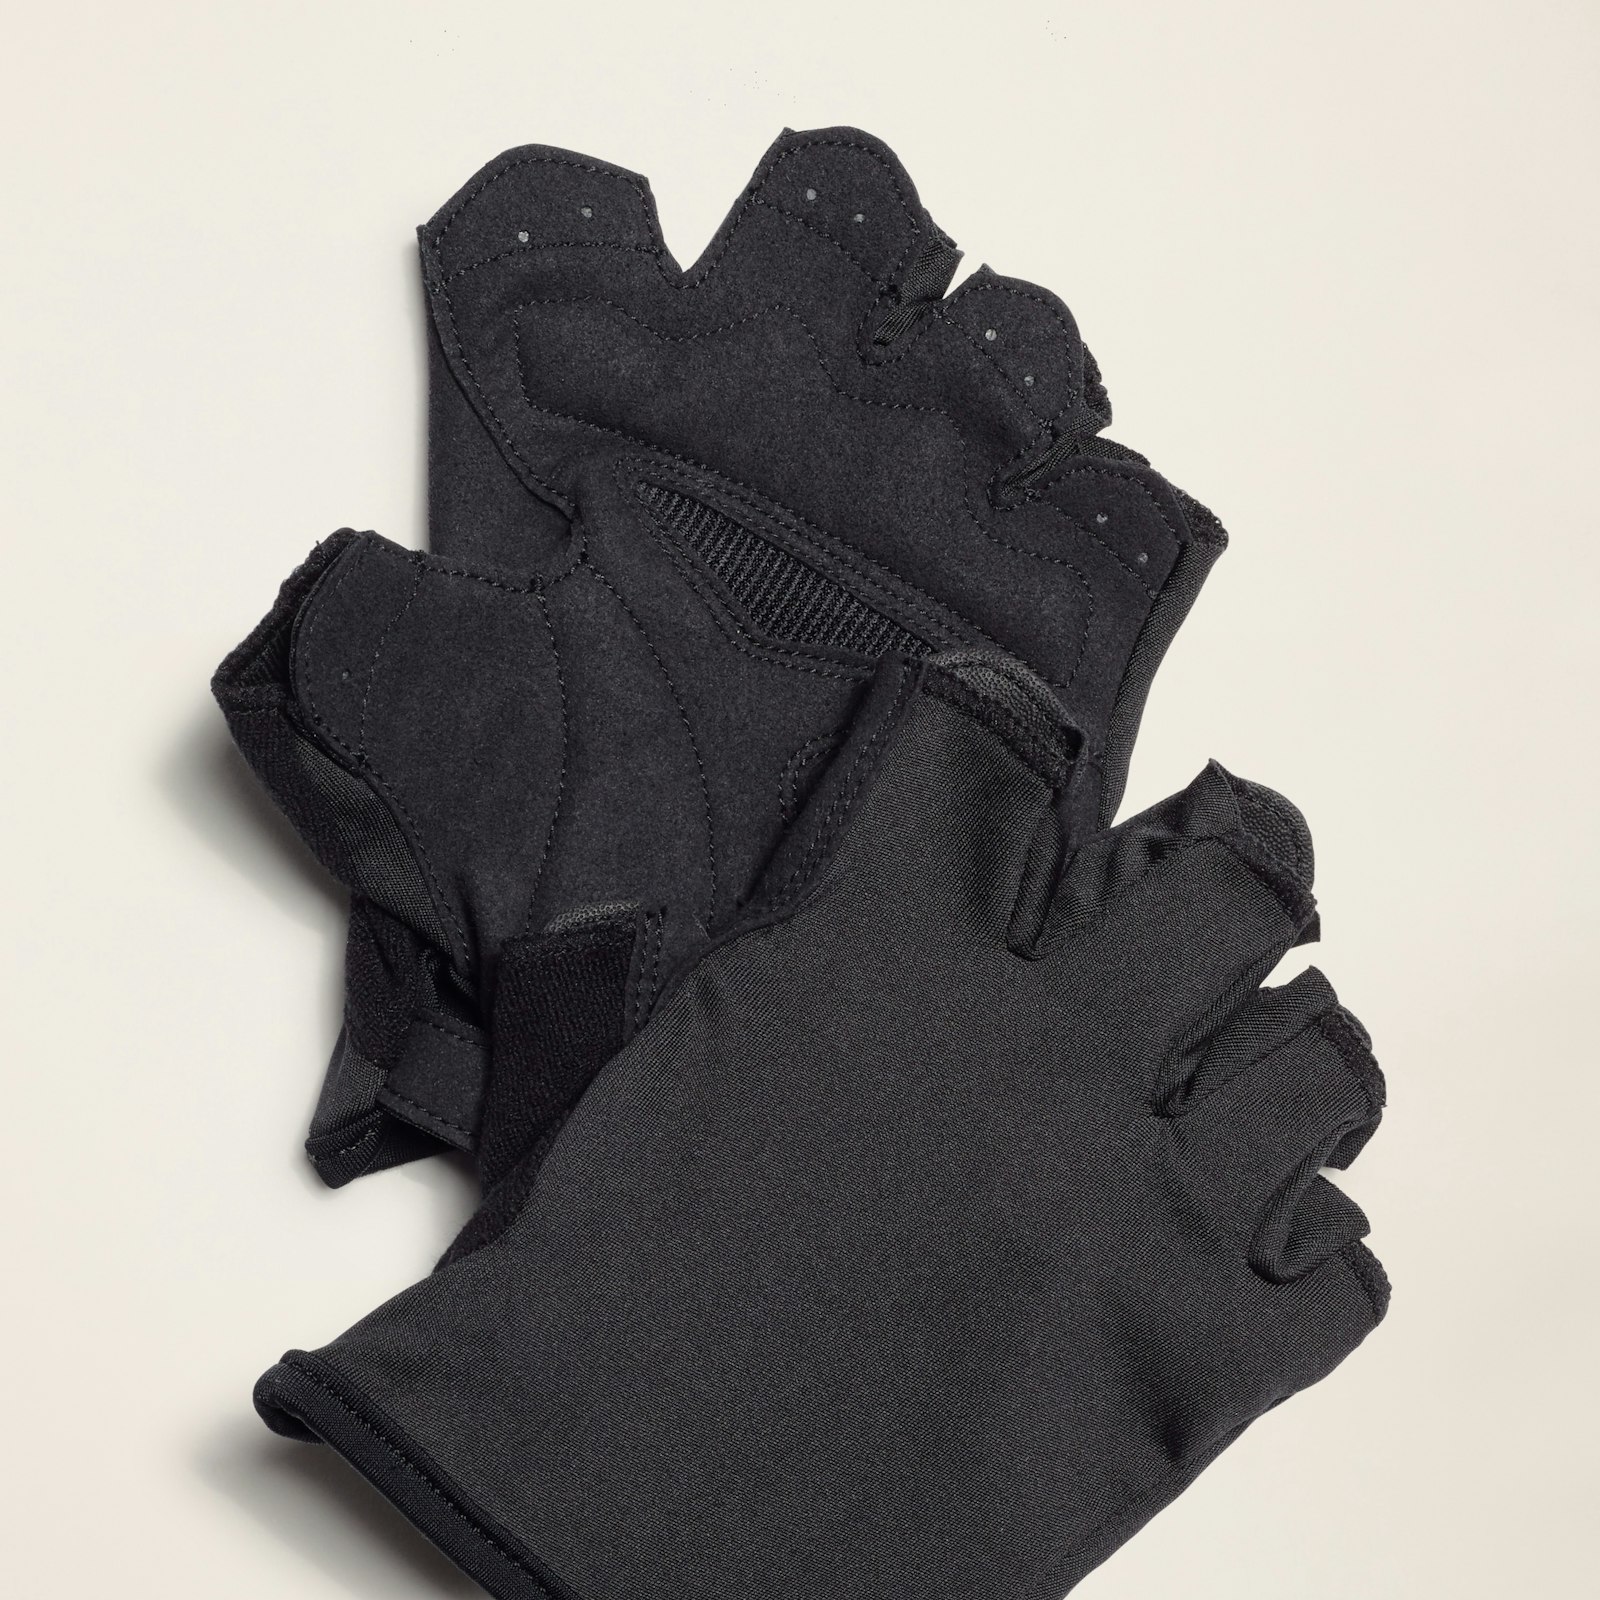 Roadrunner Cycling Mitts